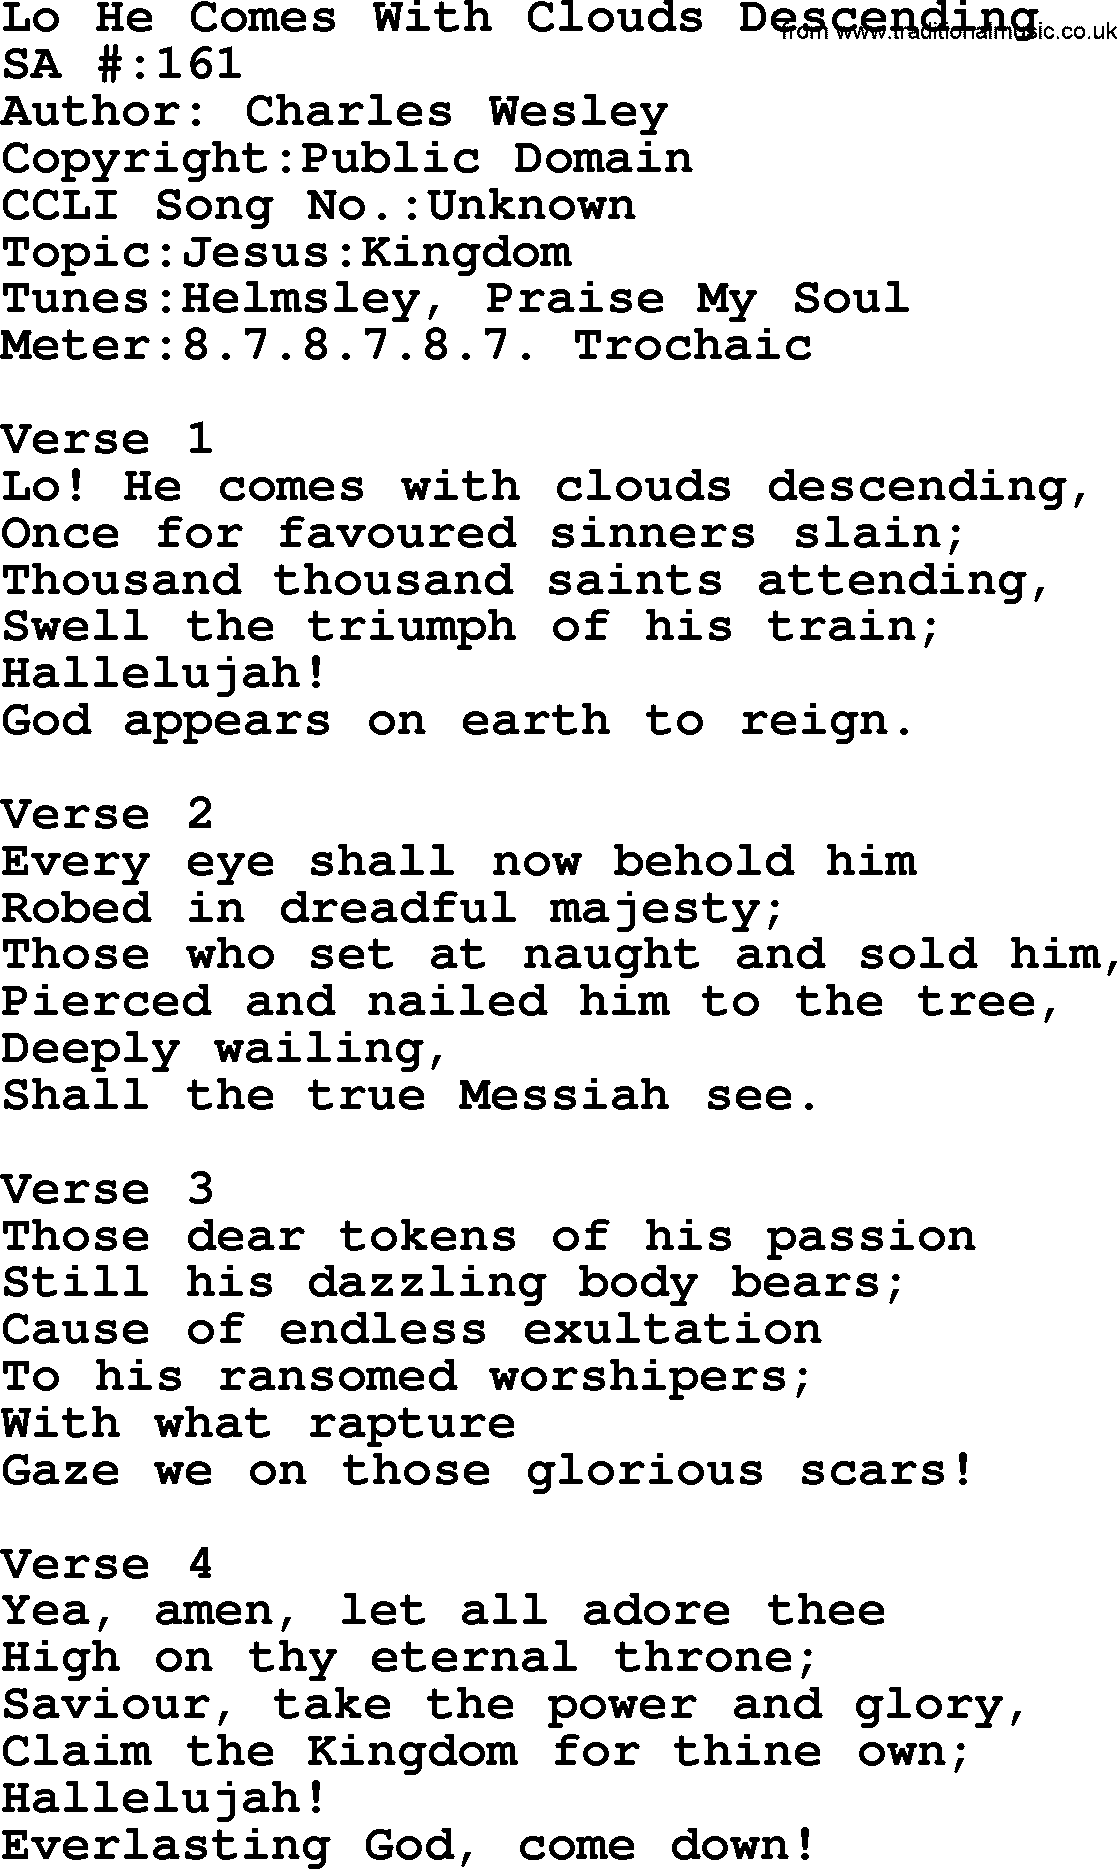 Salvation Army Hymnal, title: Lo He Comes With Clouds Descending, with lyrics and PDF,